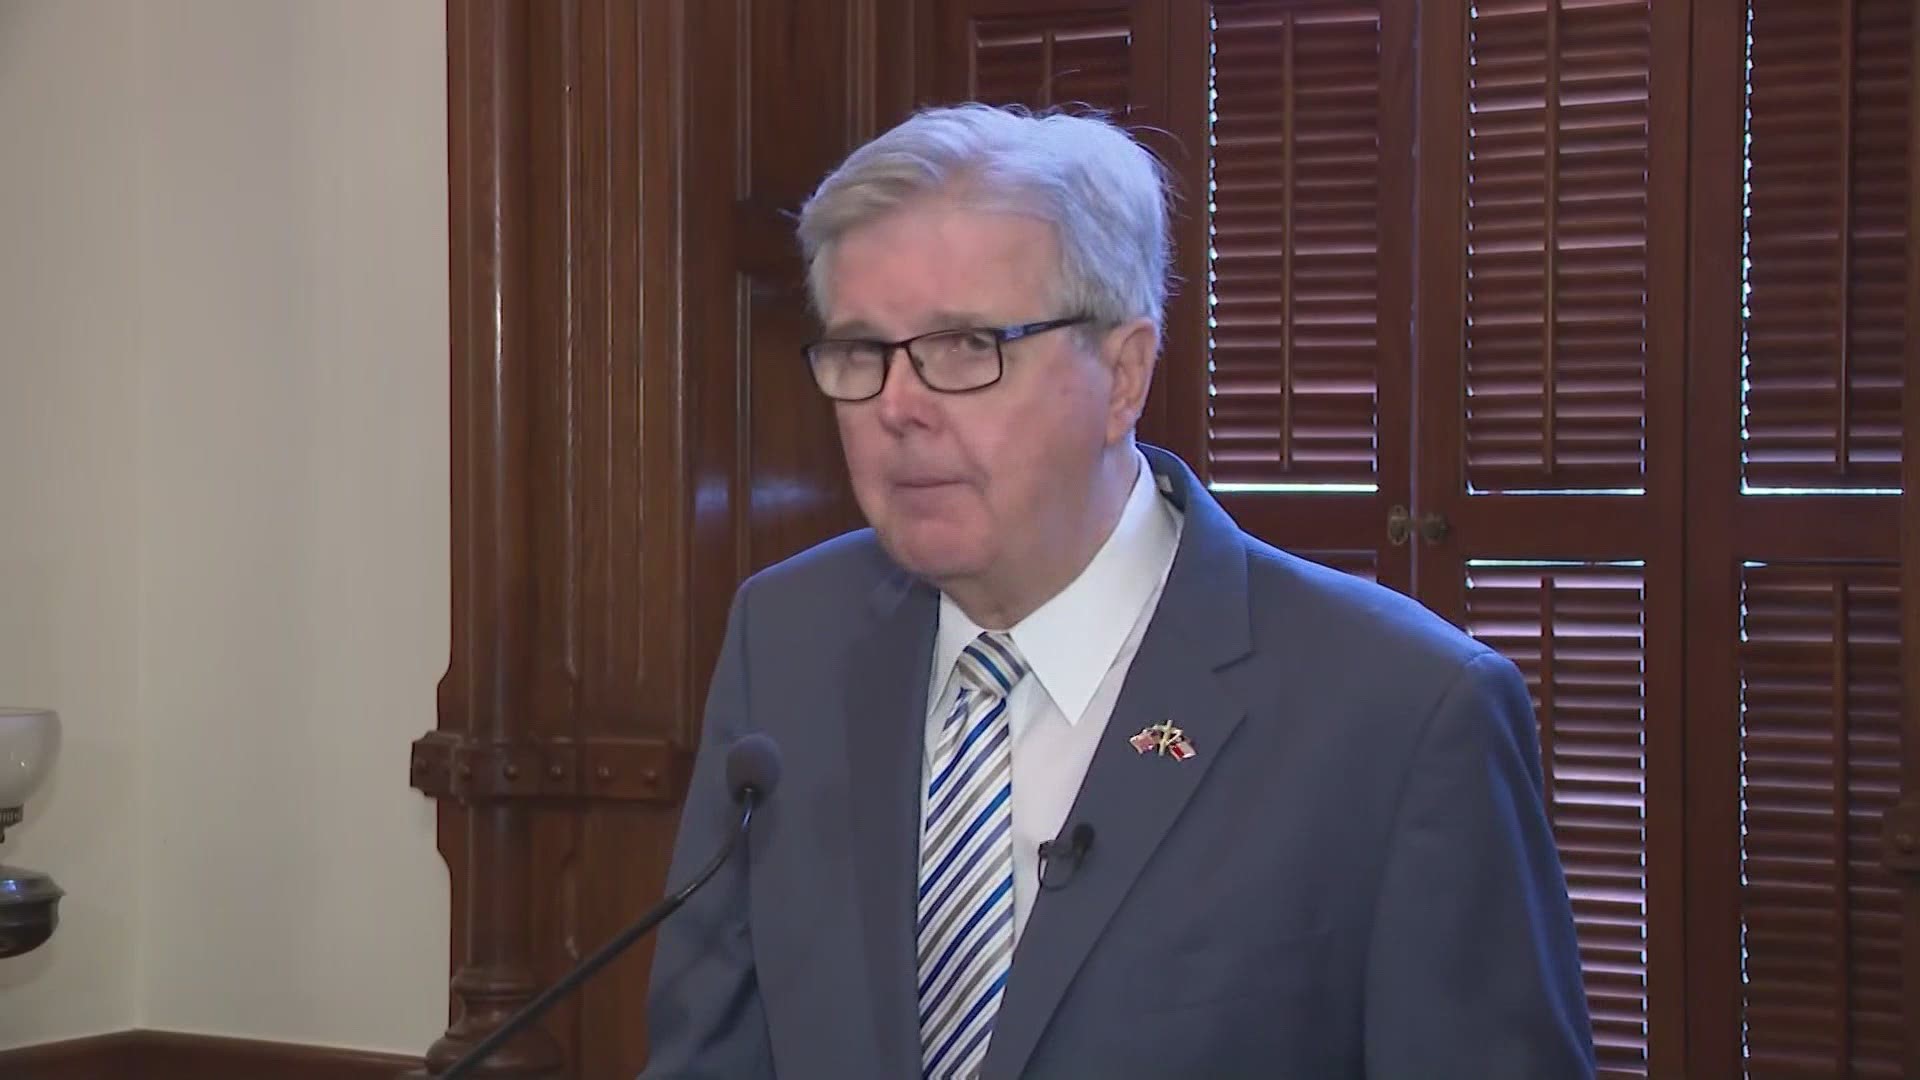 Lt. Gov. Dan Patrick on Tuesday fired back against critics of a controversial voting bill advancing through the Texas Legislature.